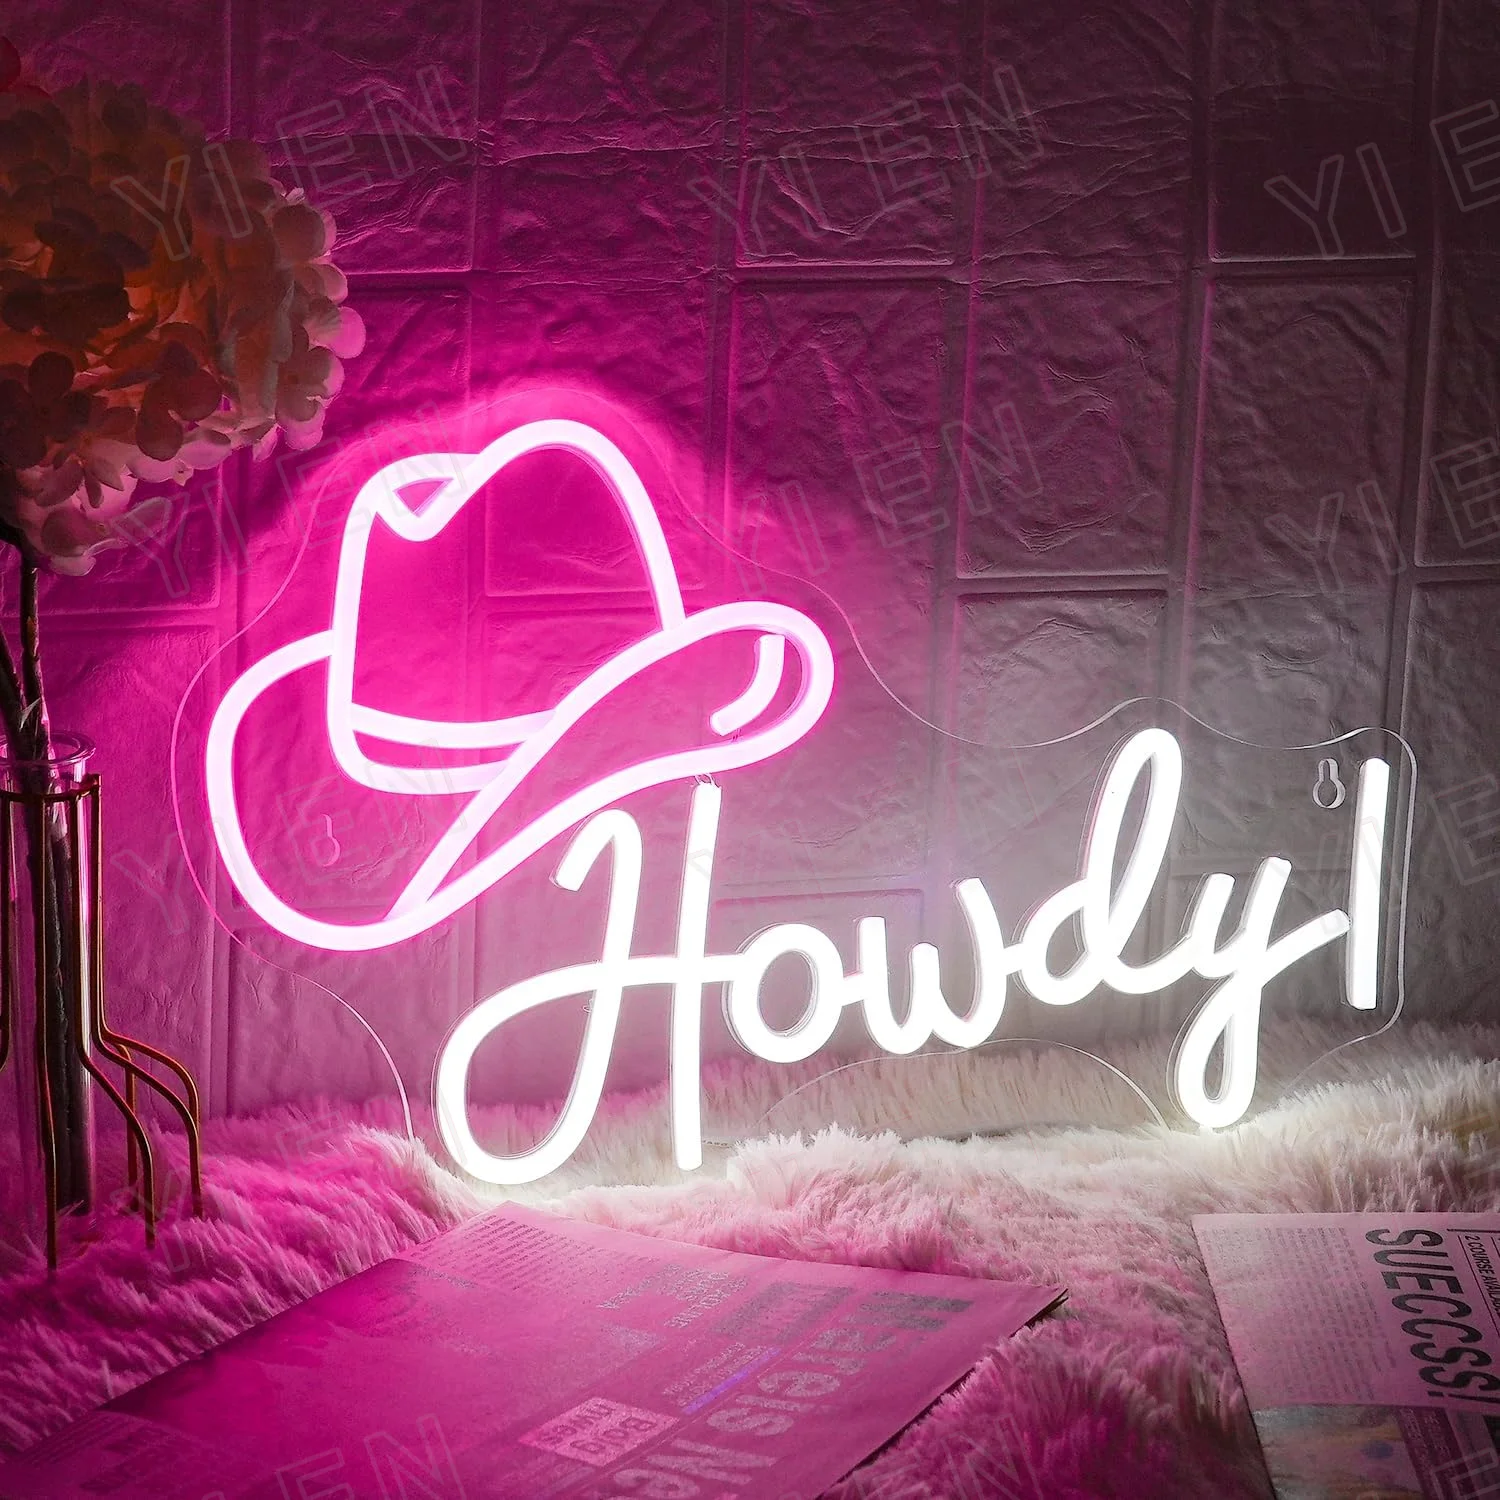 Howdy! Cowboy Hat LED Neon Wall Light Decor Sign,Peachy Neon Sign,Cowboy Man Cave Wall DecorChristmas gift